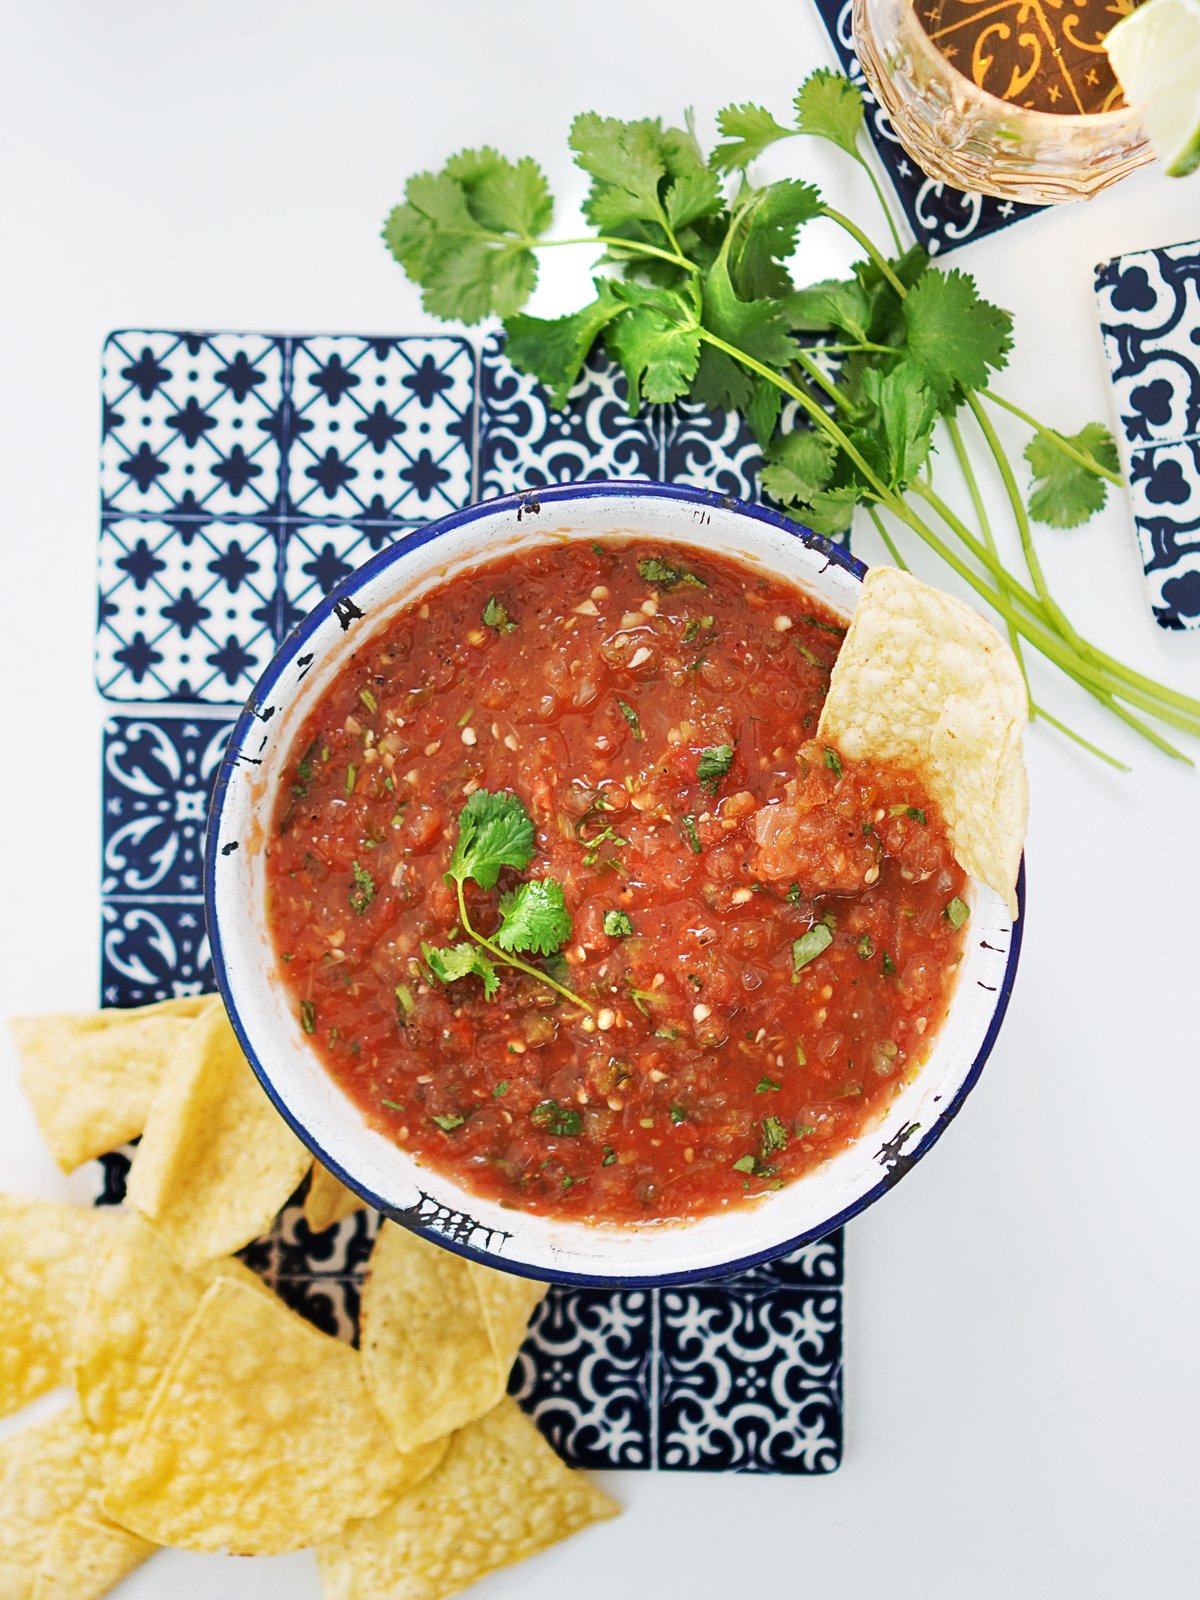 Salsa Mexicana served in a white bowl